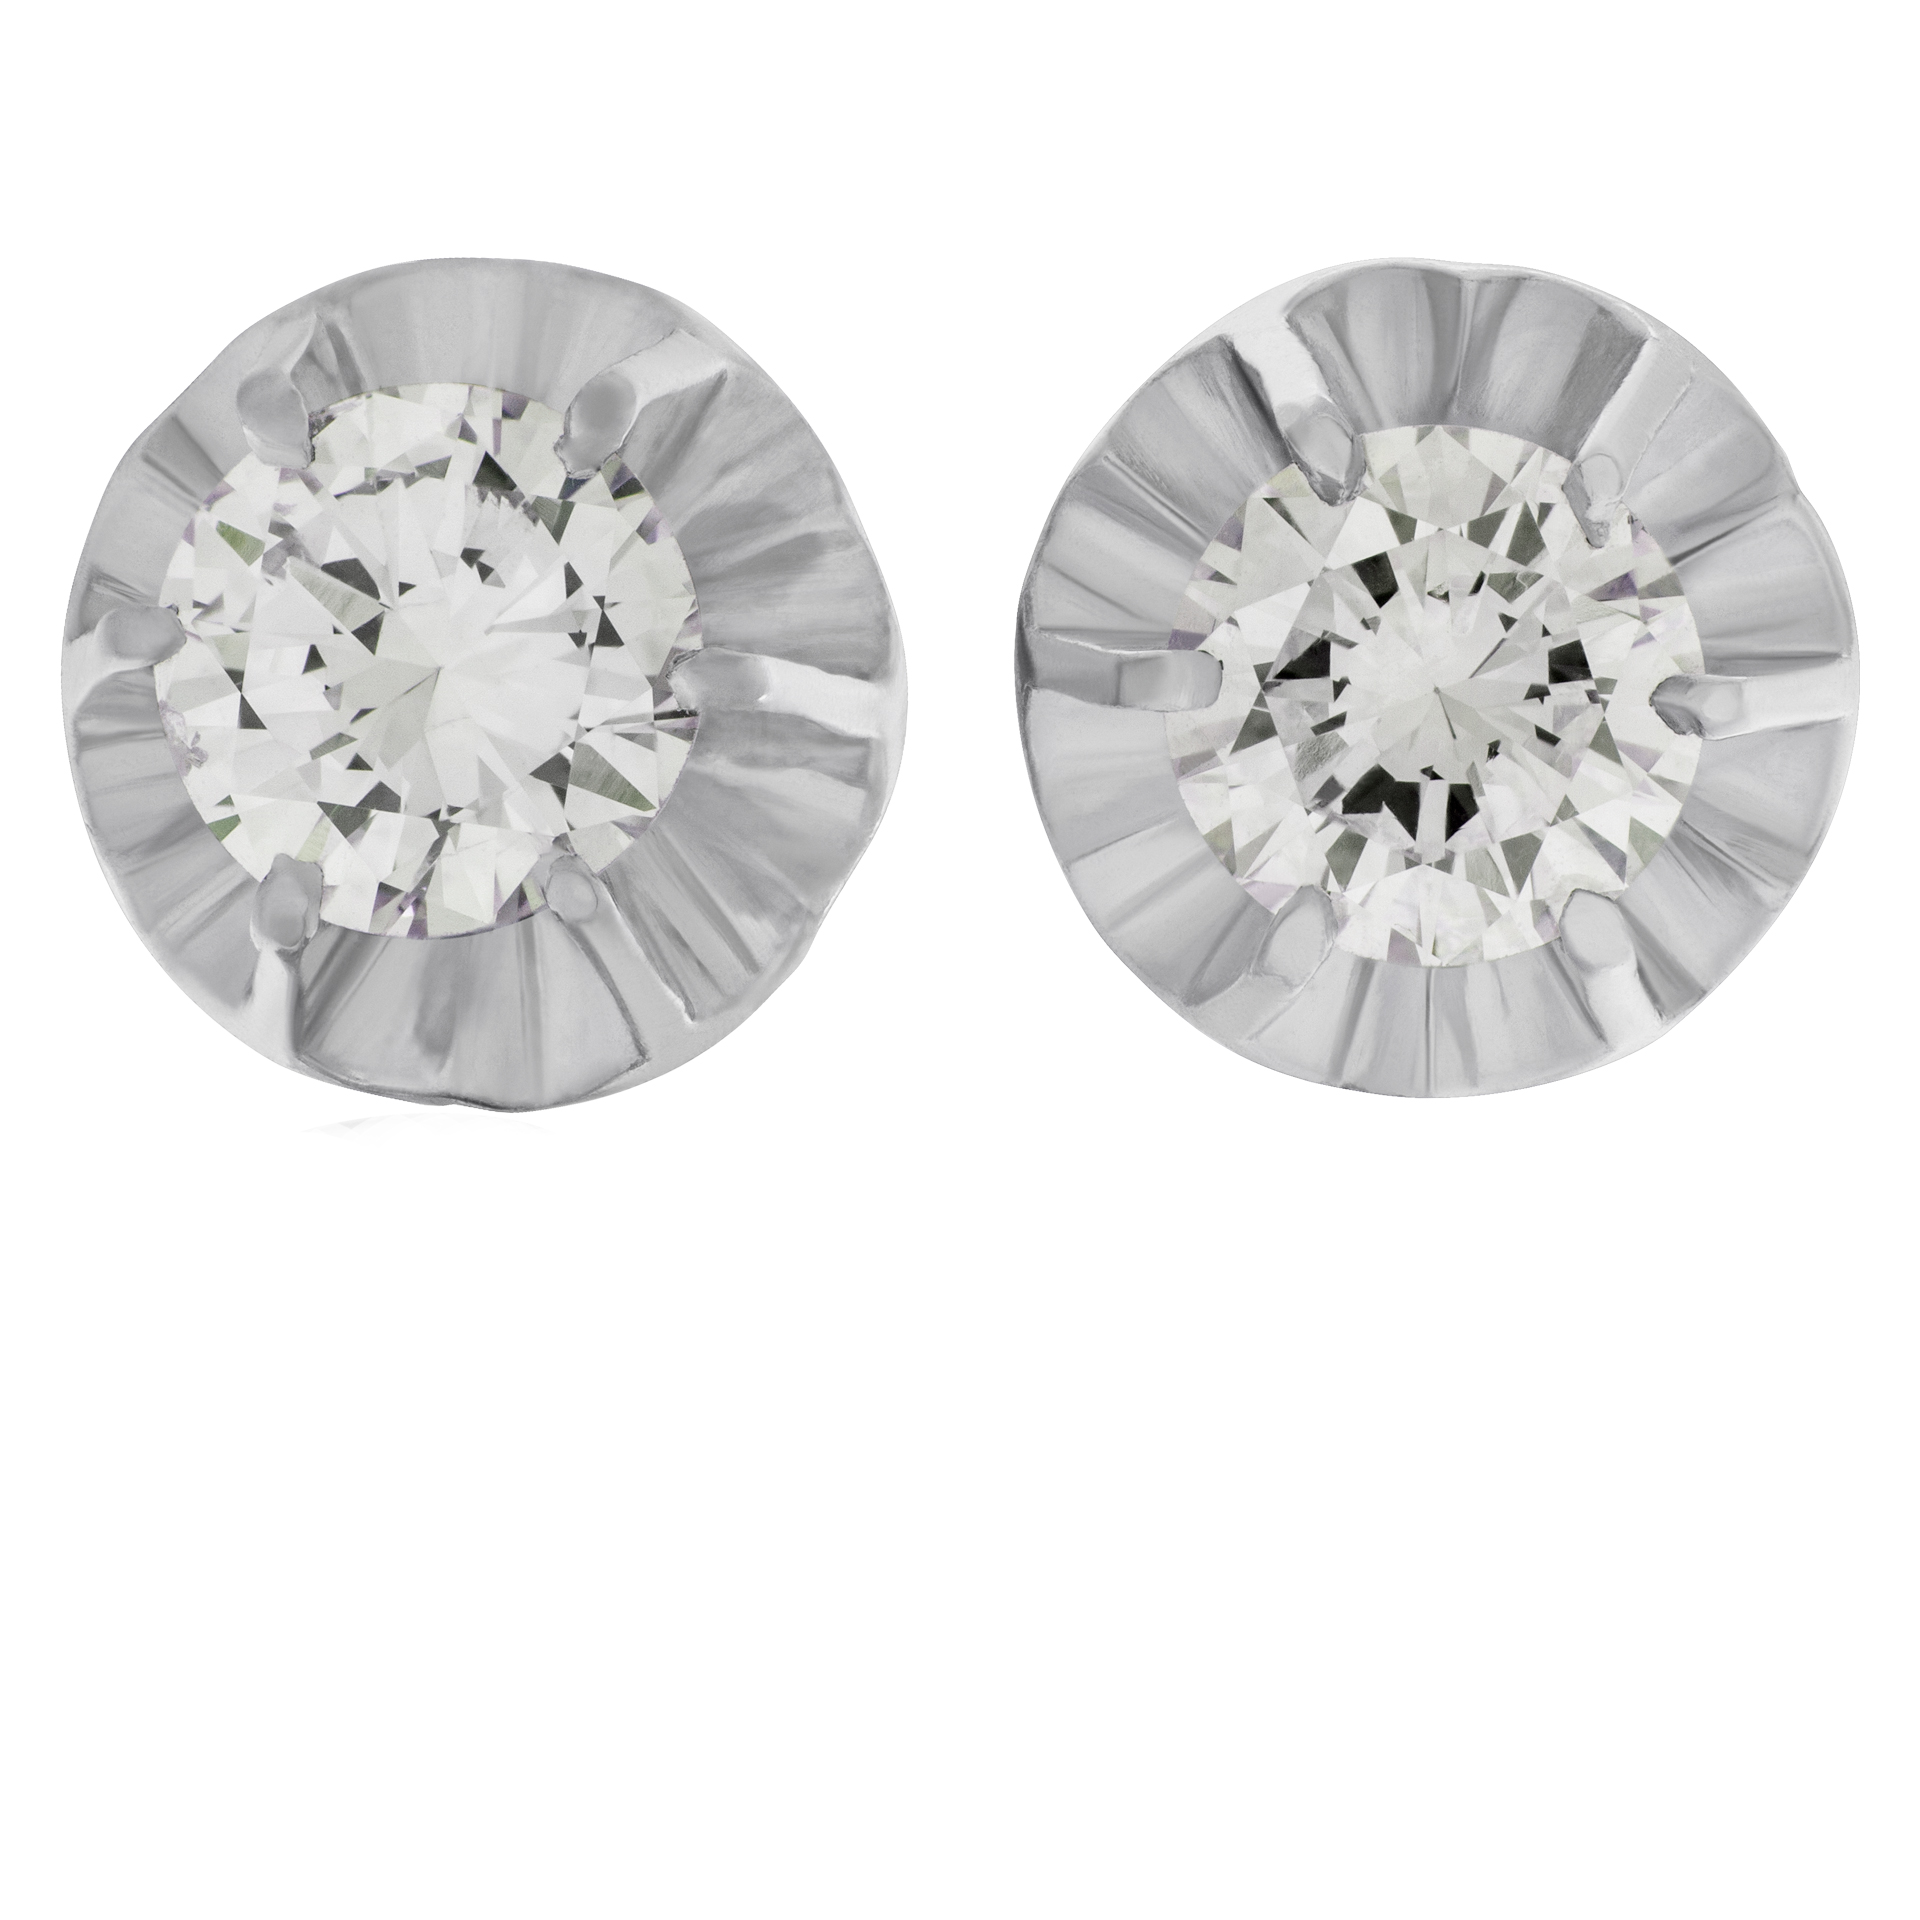 Shiny and sweet Diamond studs. 0.90 carats (J color, SI1 clarity) set in platinum image 1